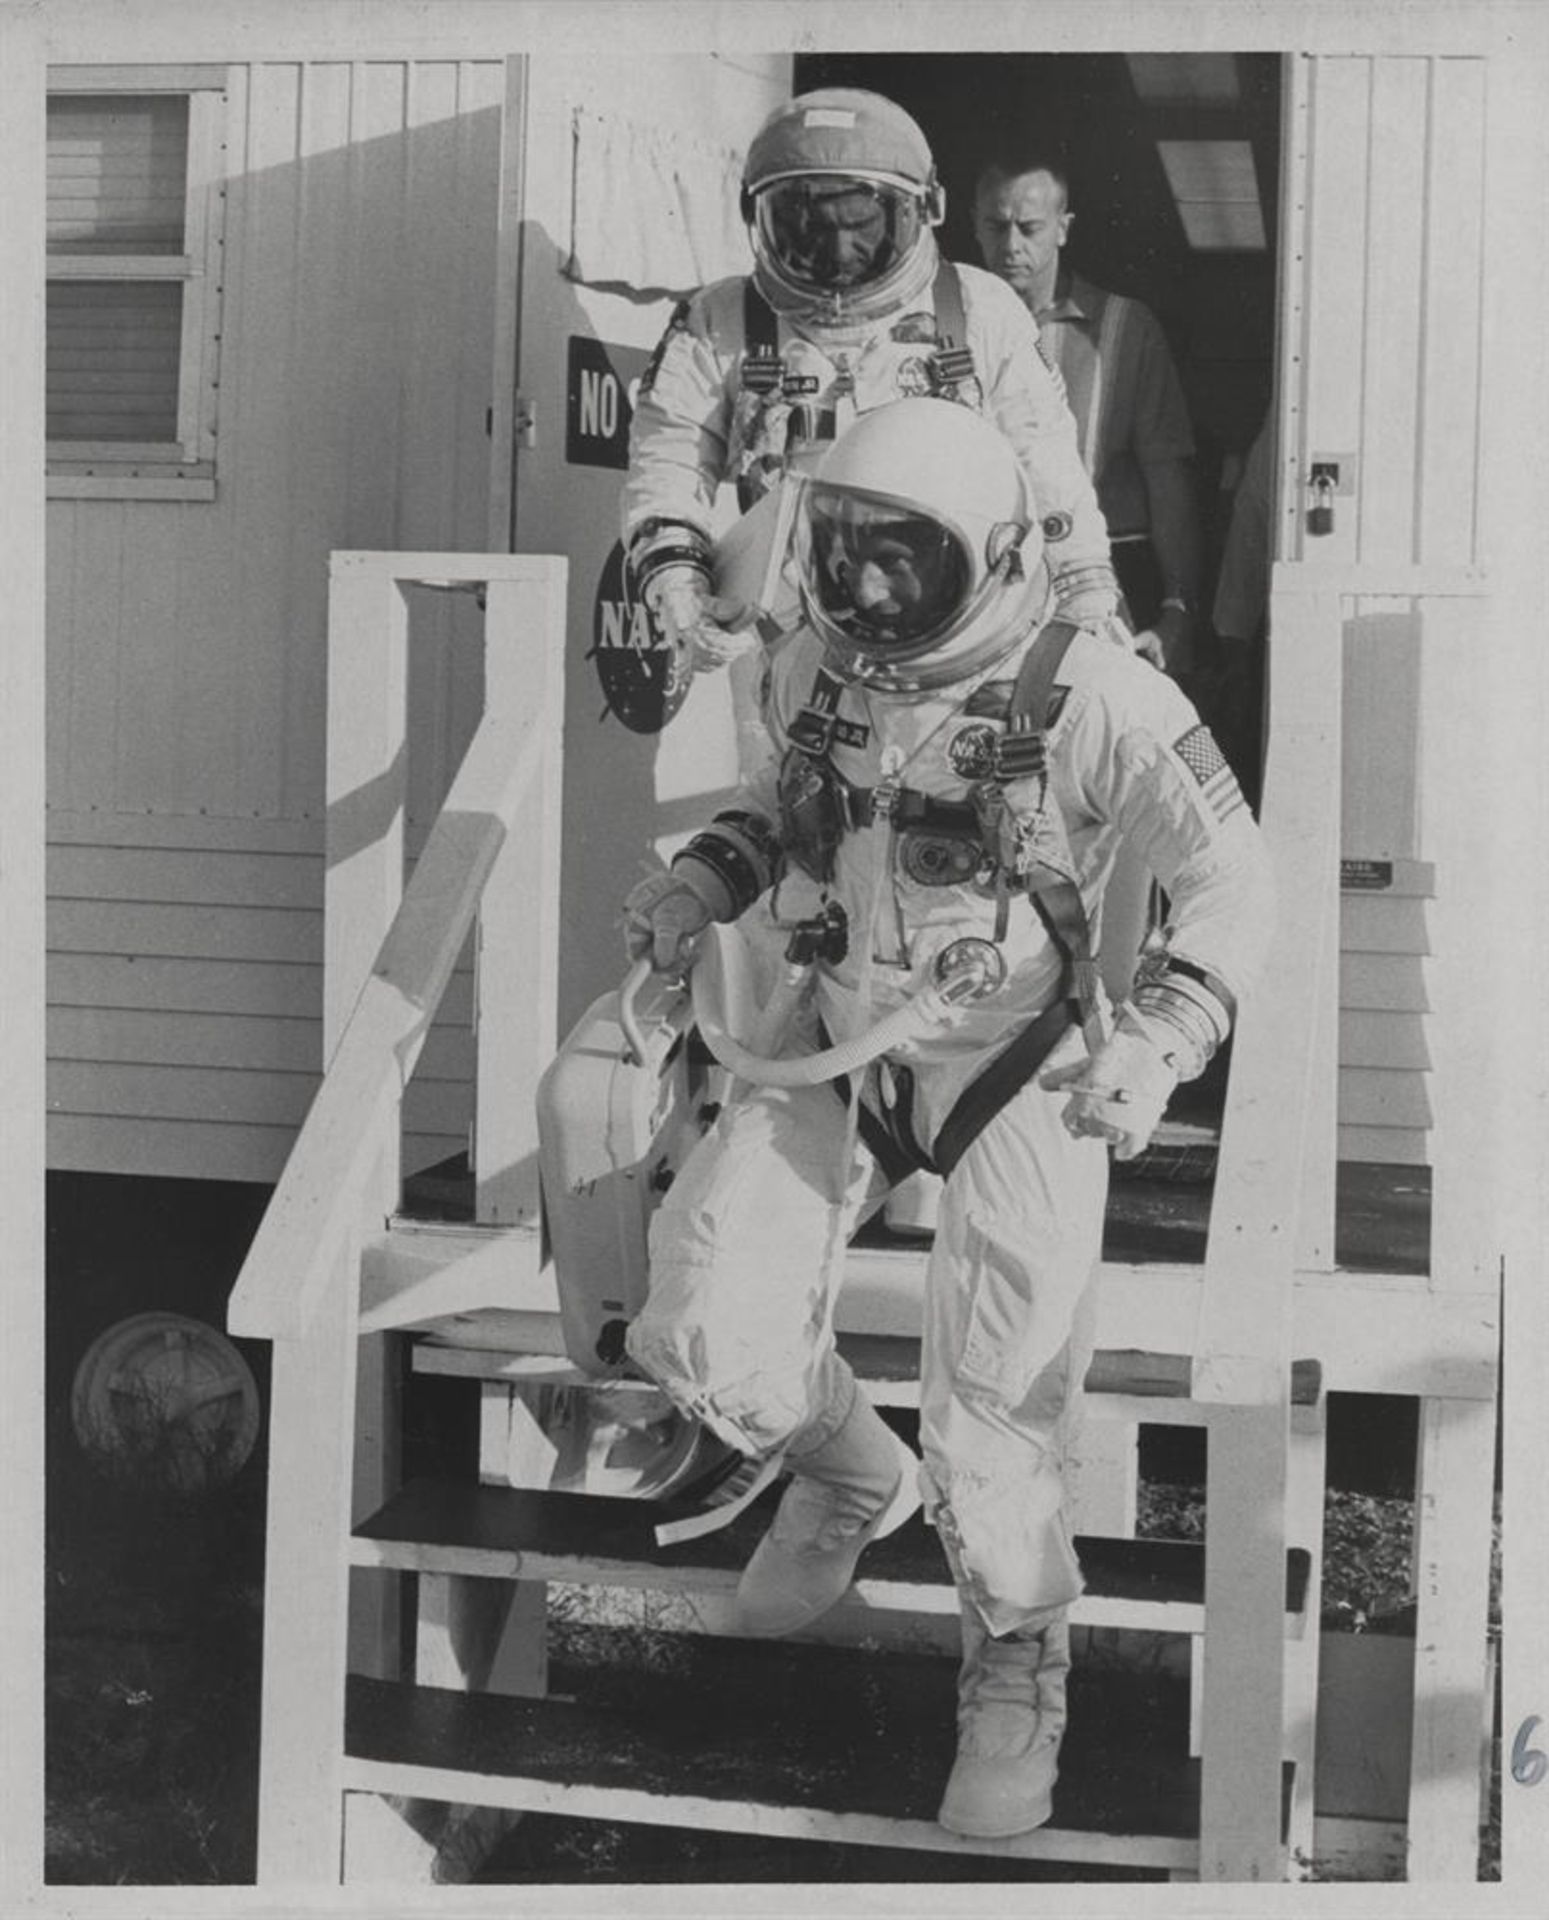 Charles Conrad and Richard Gordon during walkout for launch (2 photos), Gemini 11, September 1966 - Image 2 of 5